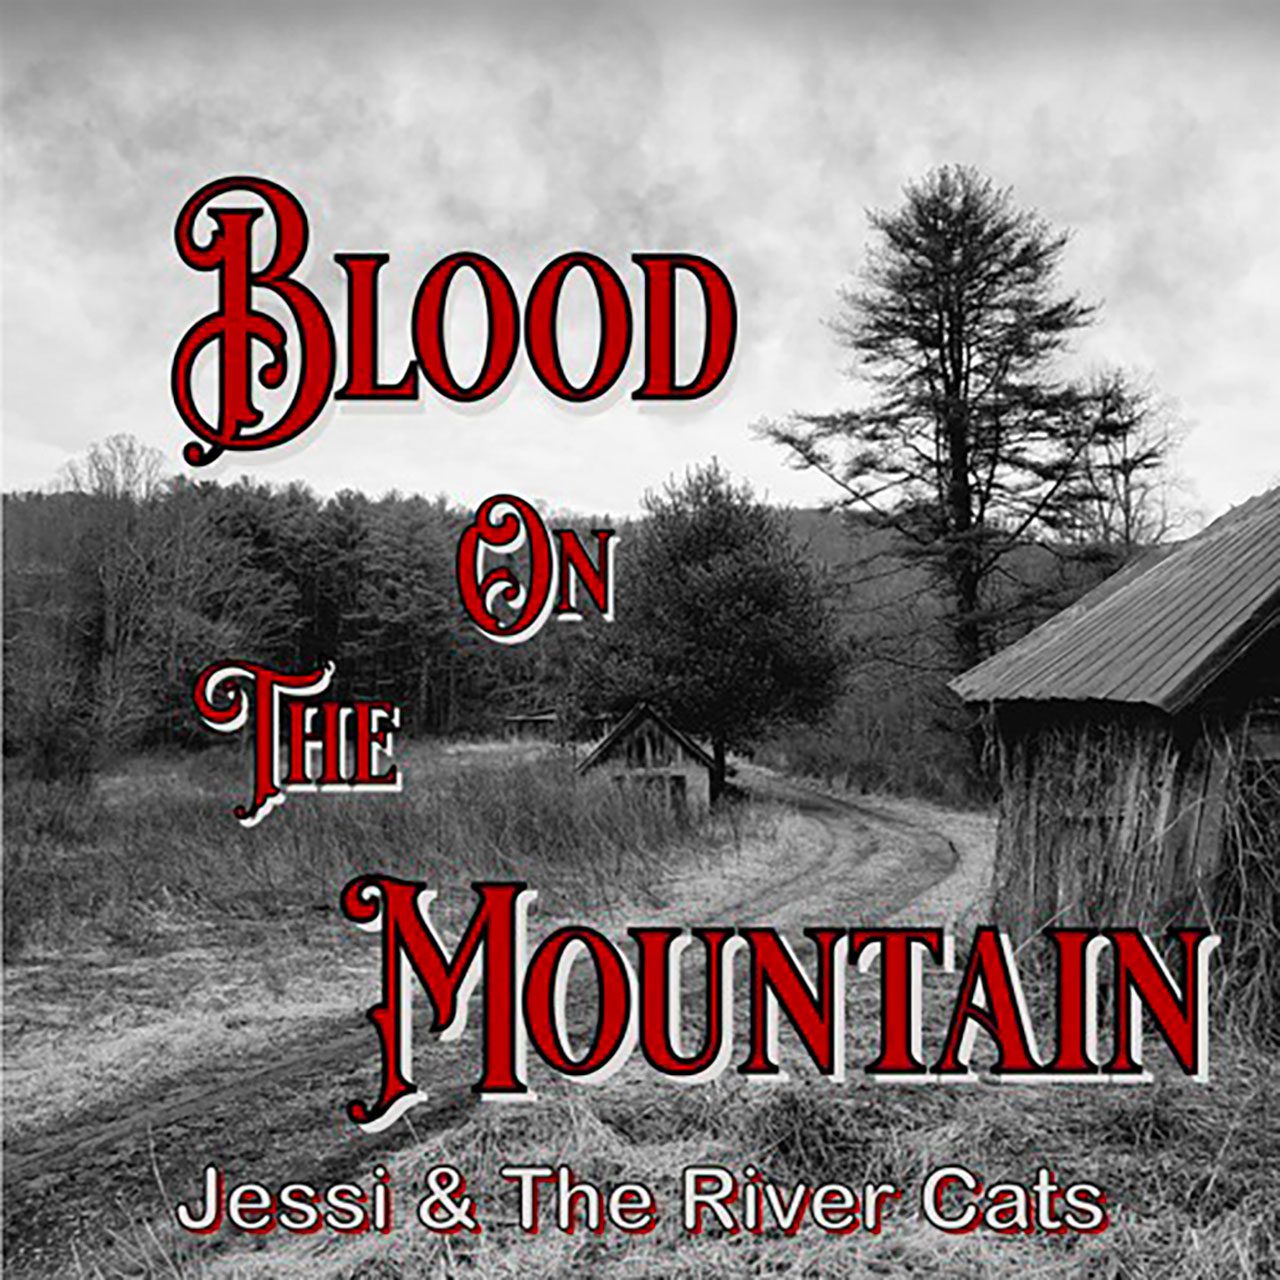 JESSI & THE RIVER CATS BLOOD ON THE MOUNTAIN cover album